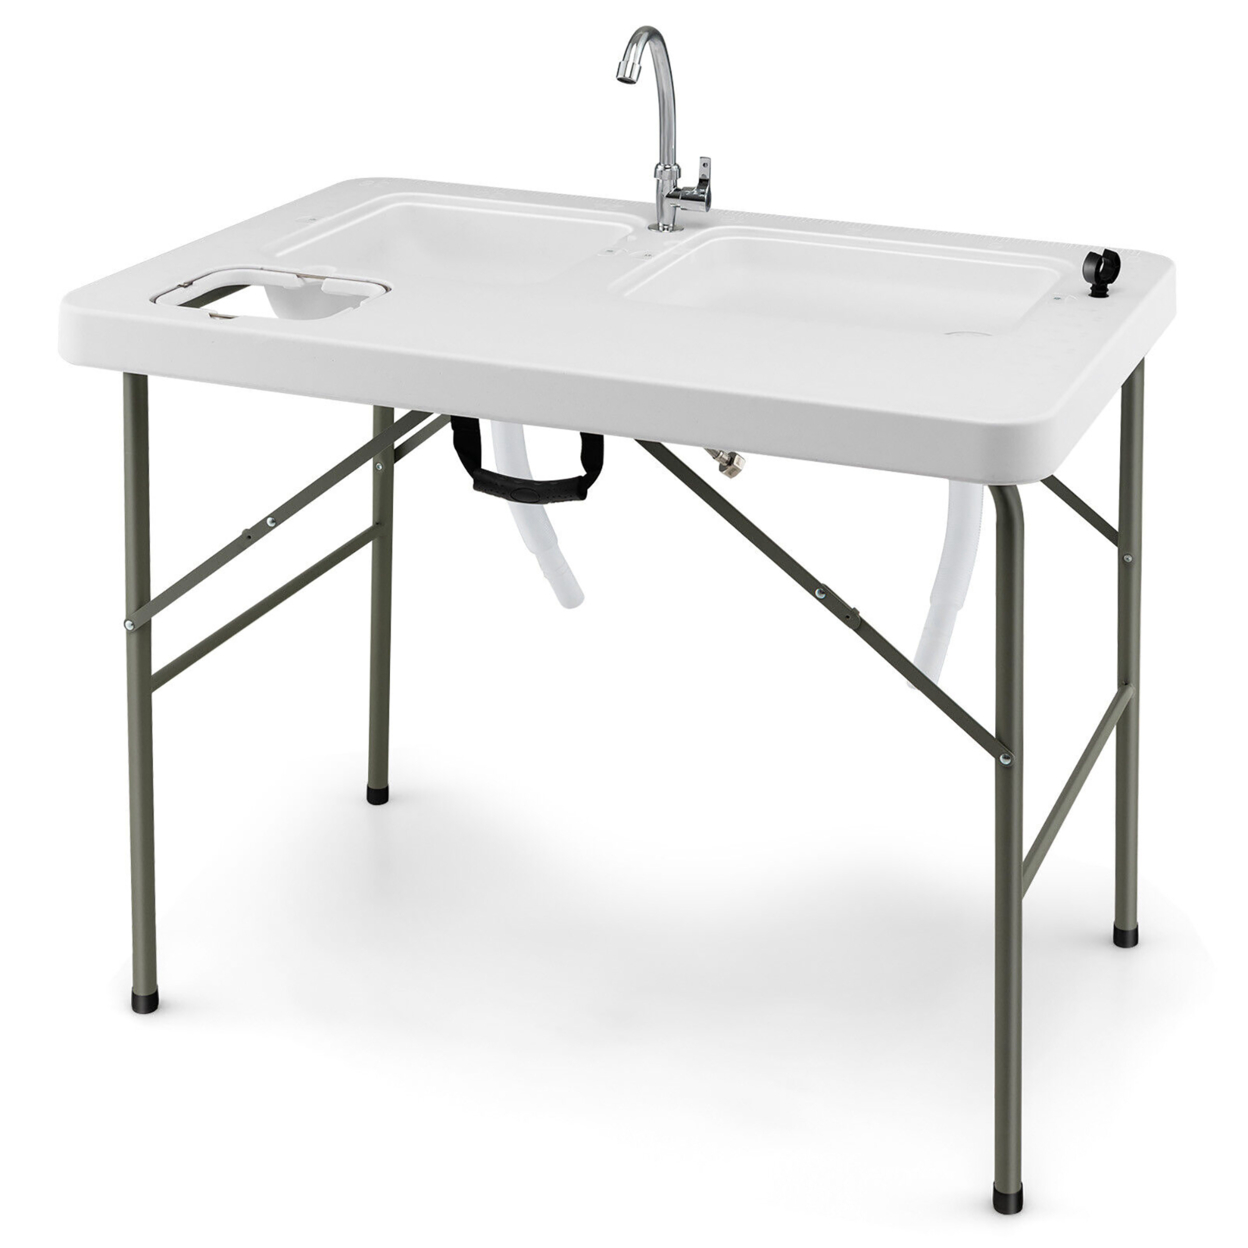 Folding Fish Cleaning Table W/ 2 Built-in Sinks & 360Â° Rotatable Faucet